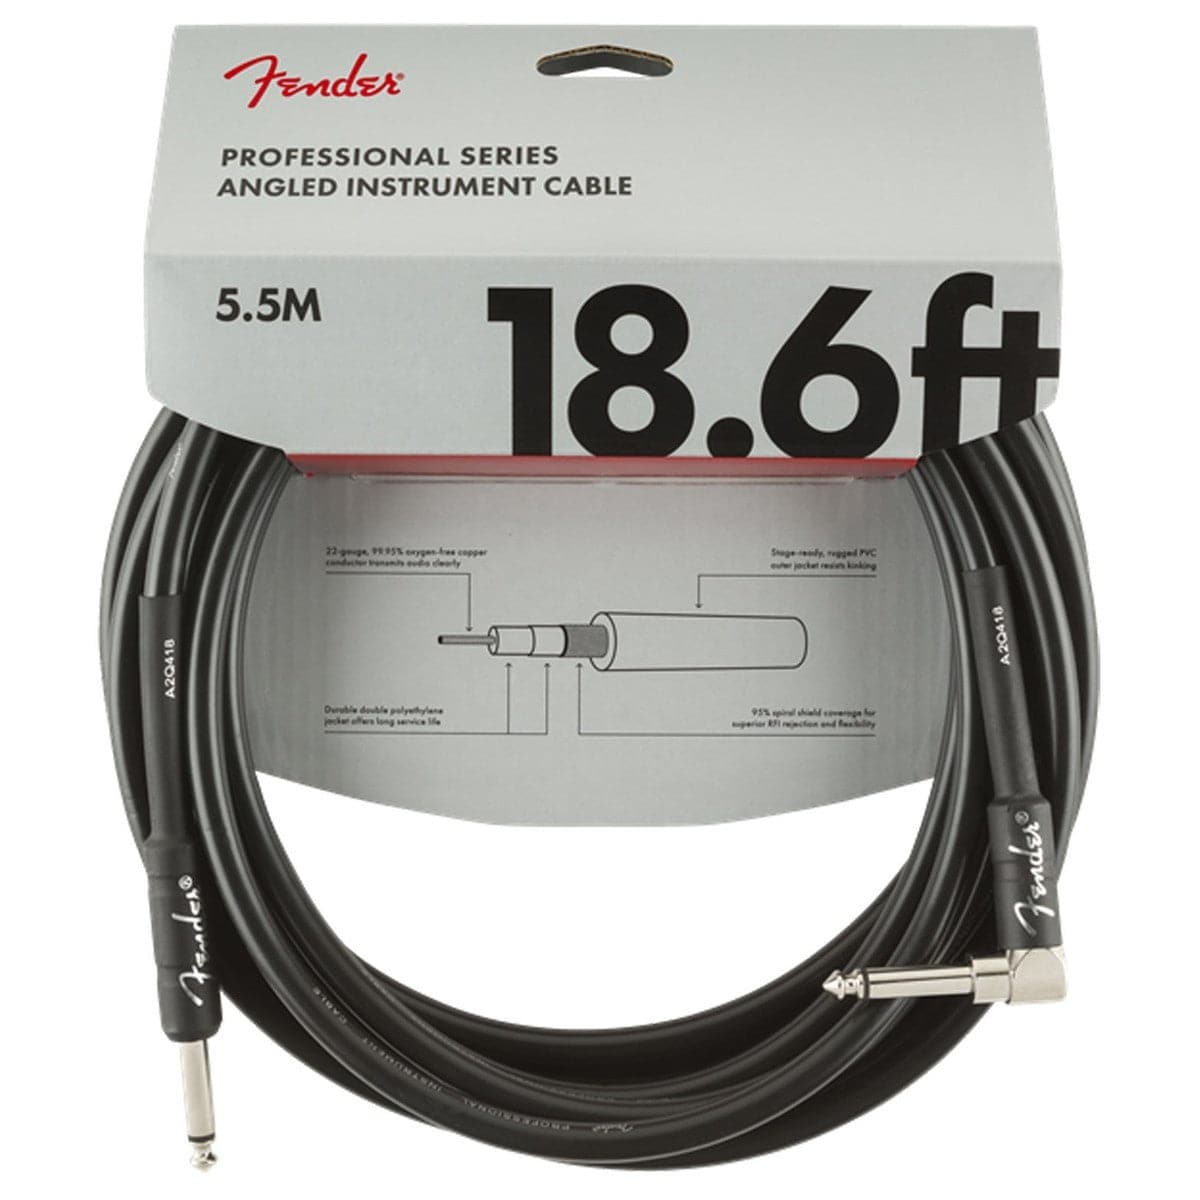 Fender Professional Series Instrument Cable - Right Angle - 5.5m 18.6ft - Black (0990820019)